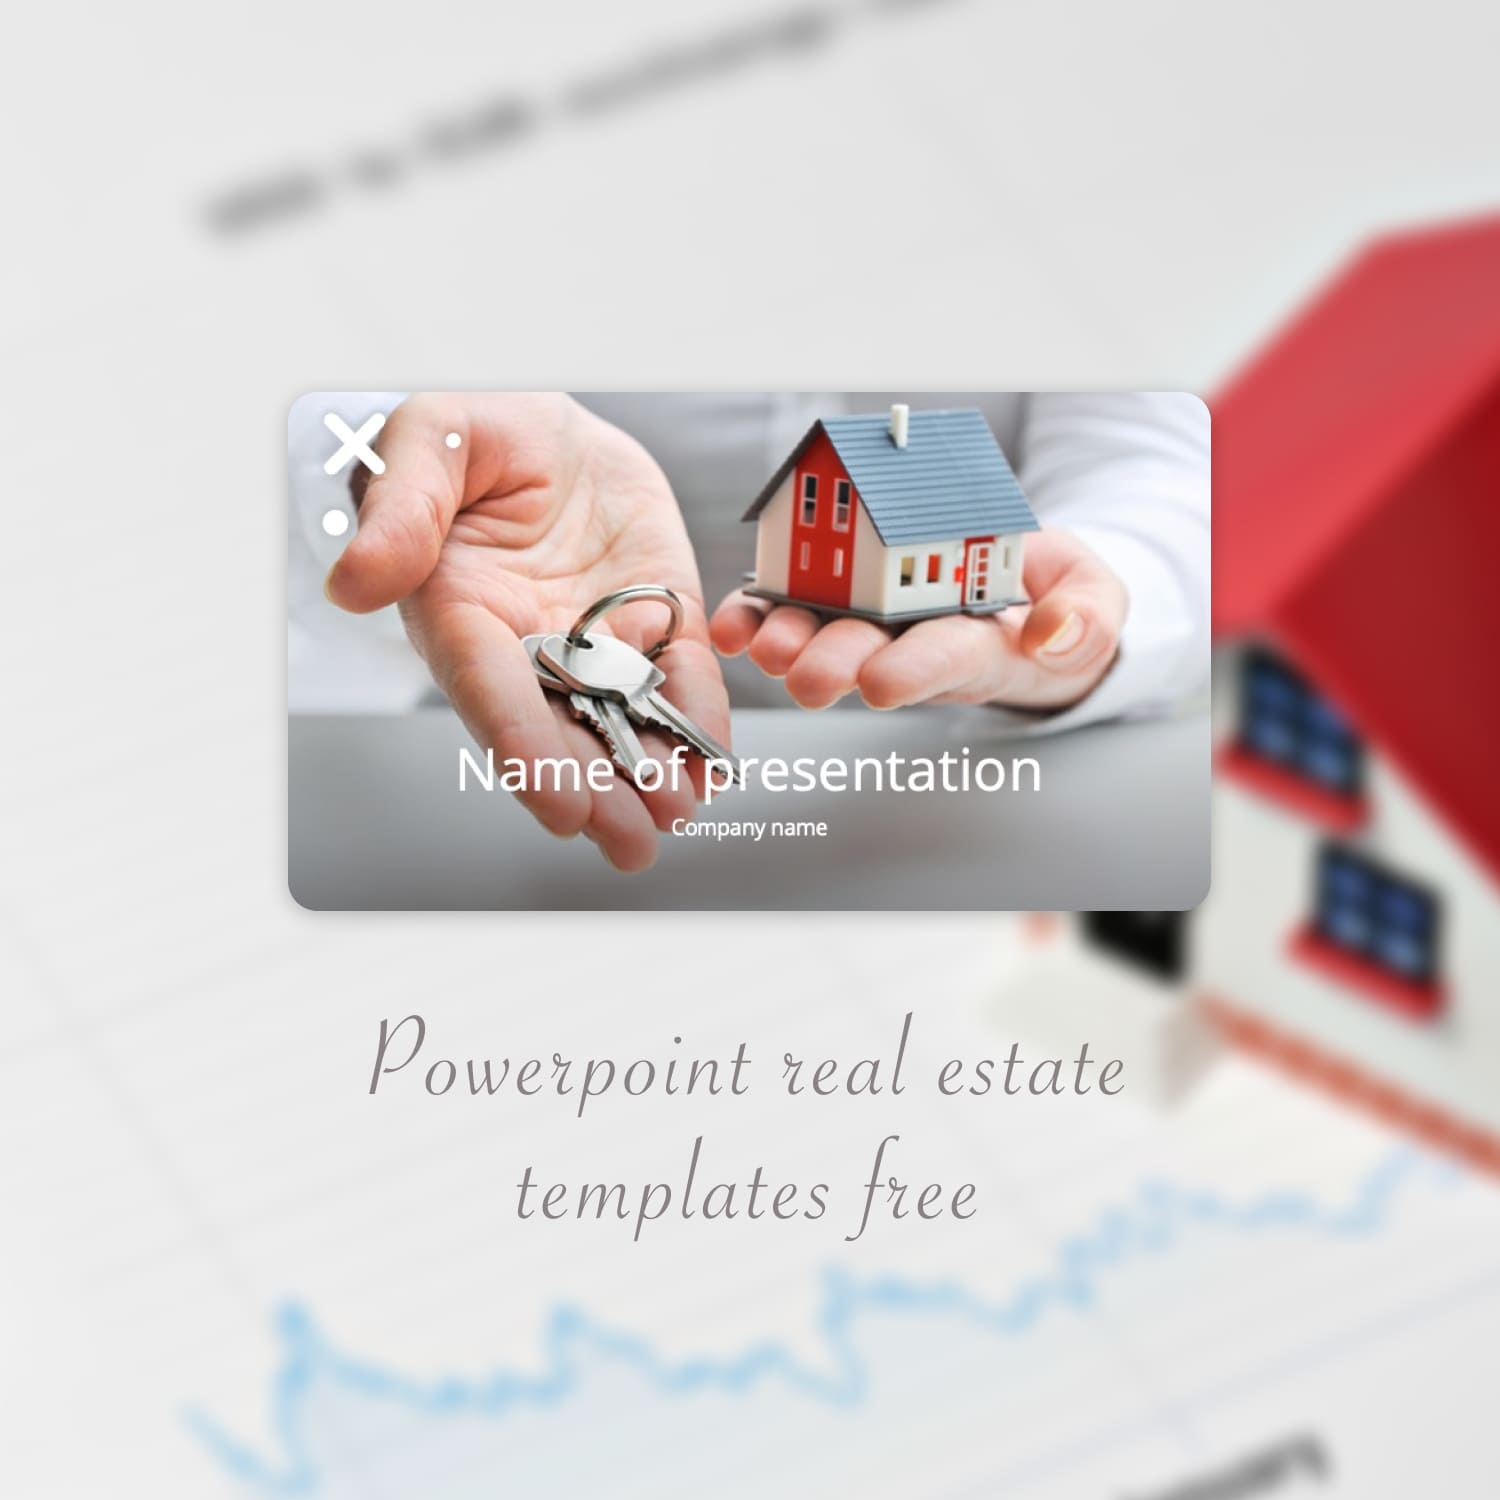 1500 1 Powerpoint Real Estate Templates Free.